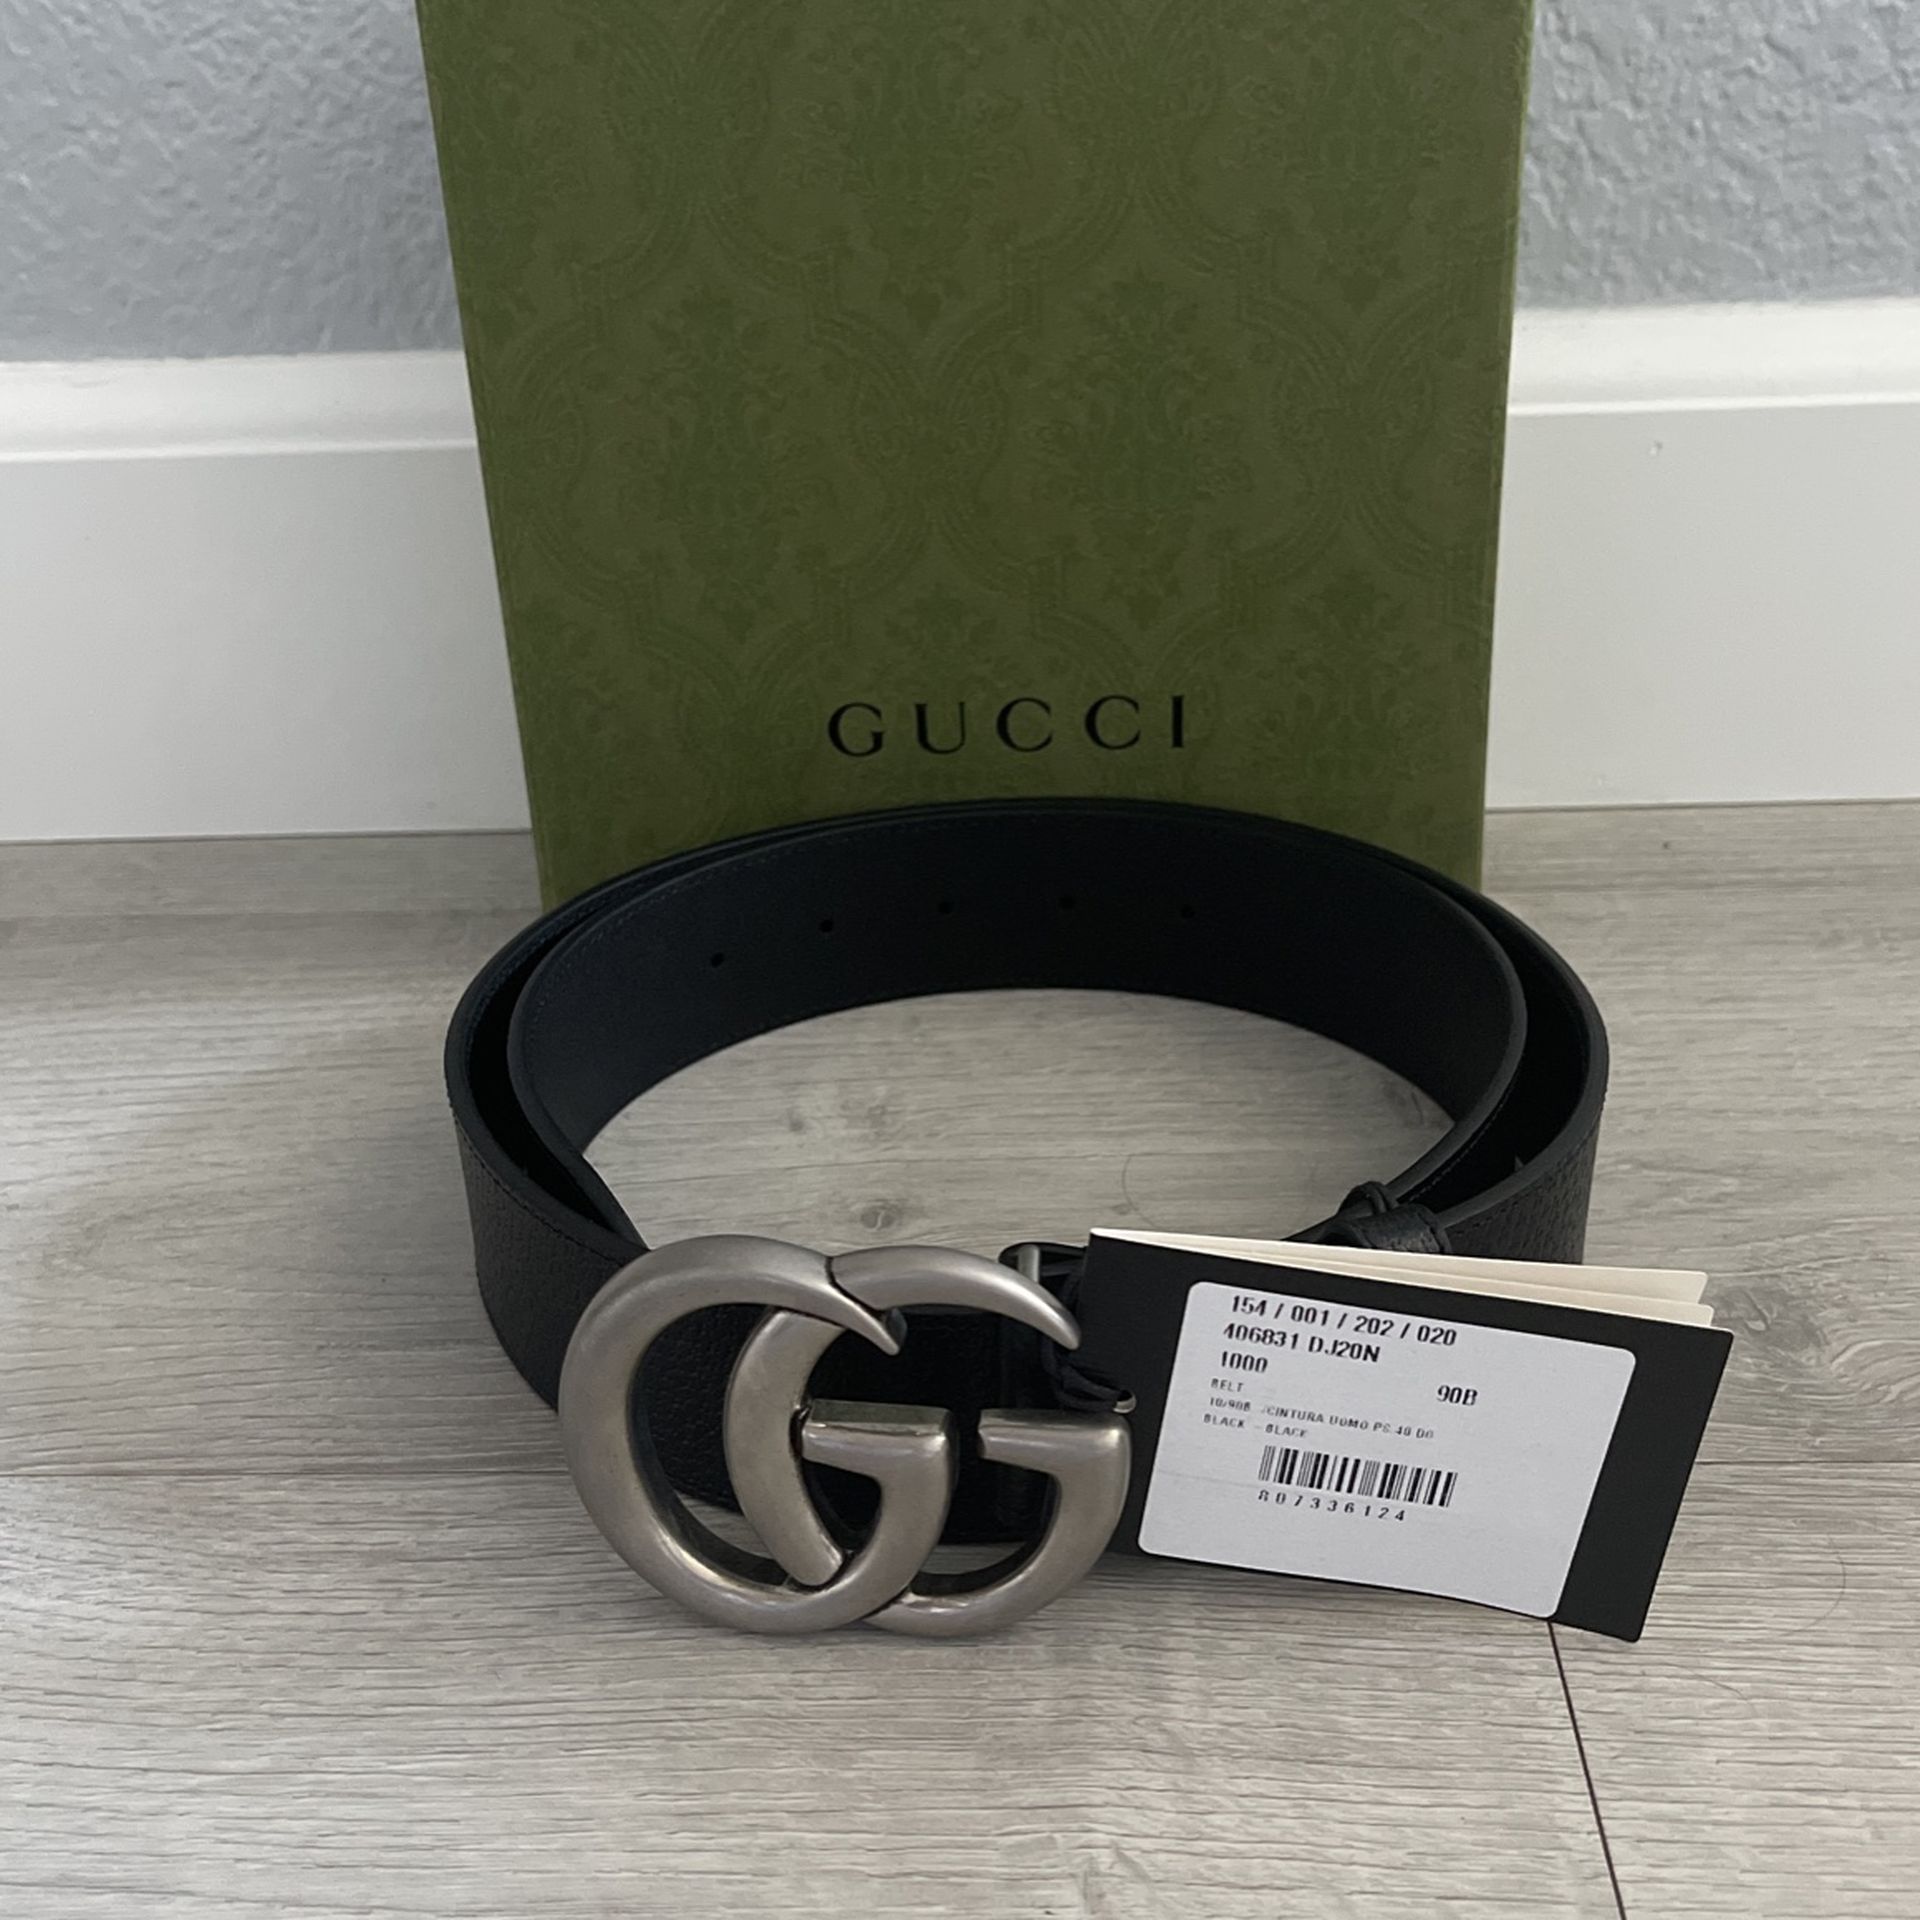 Brand New Gucci Belt! Never Worn Still In The Box With Tag 